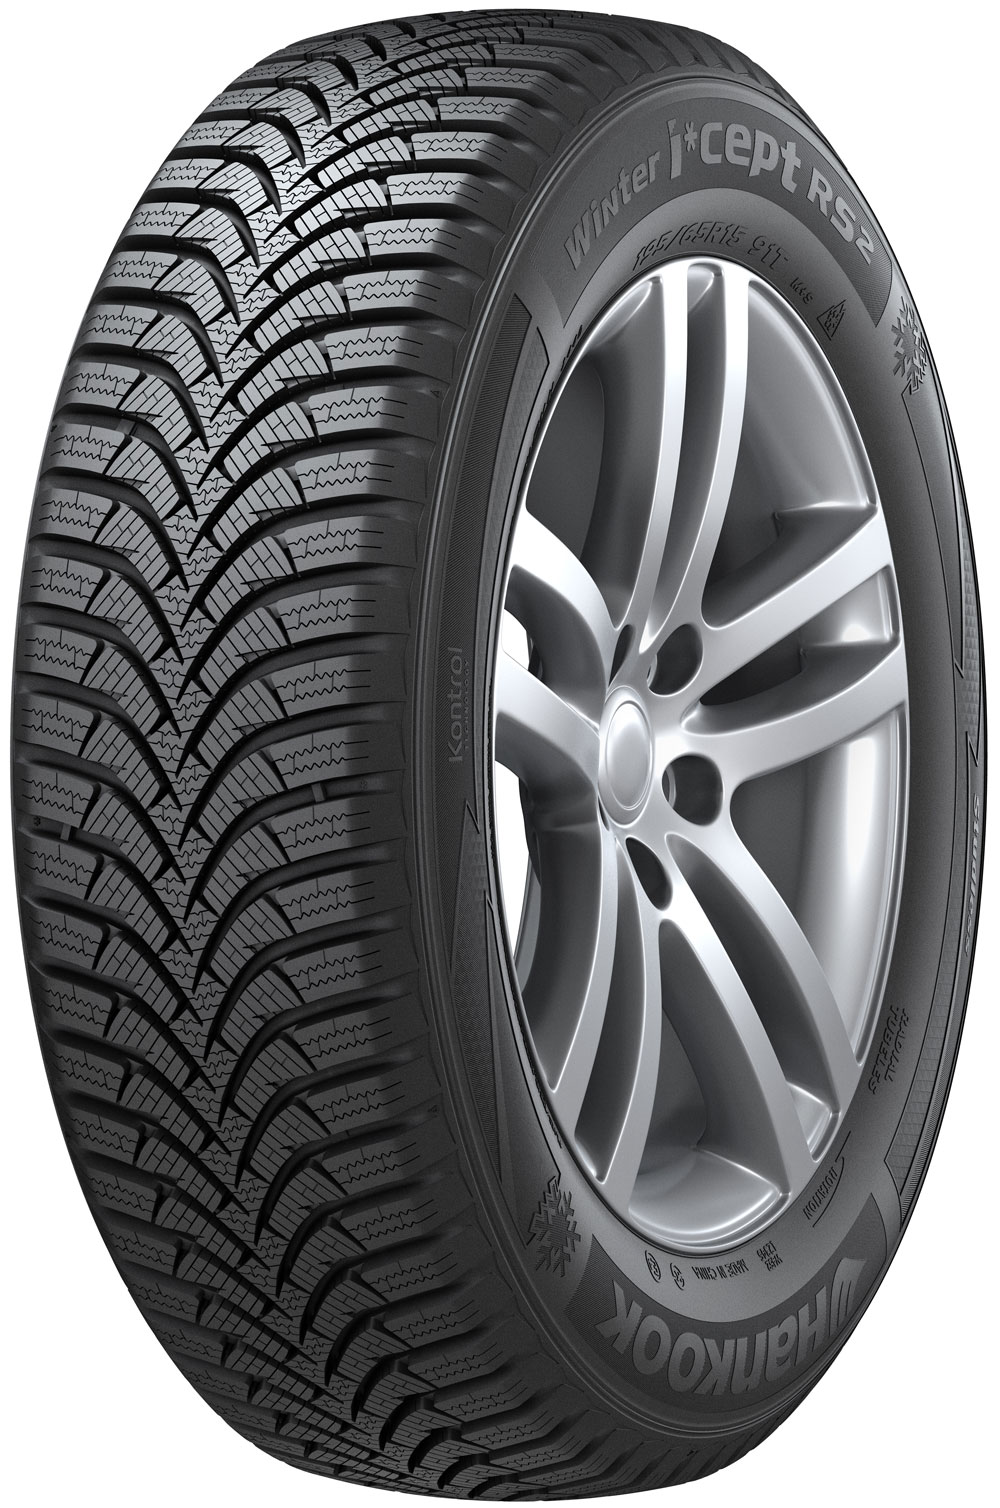 Anvelope auto HANKOOK Winter icept RS 2 (W452) BMW 155/65 R14 75T